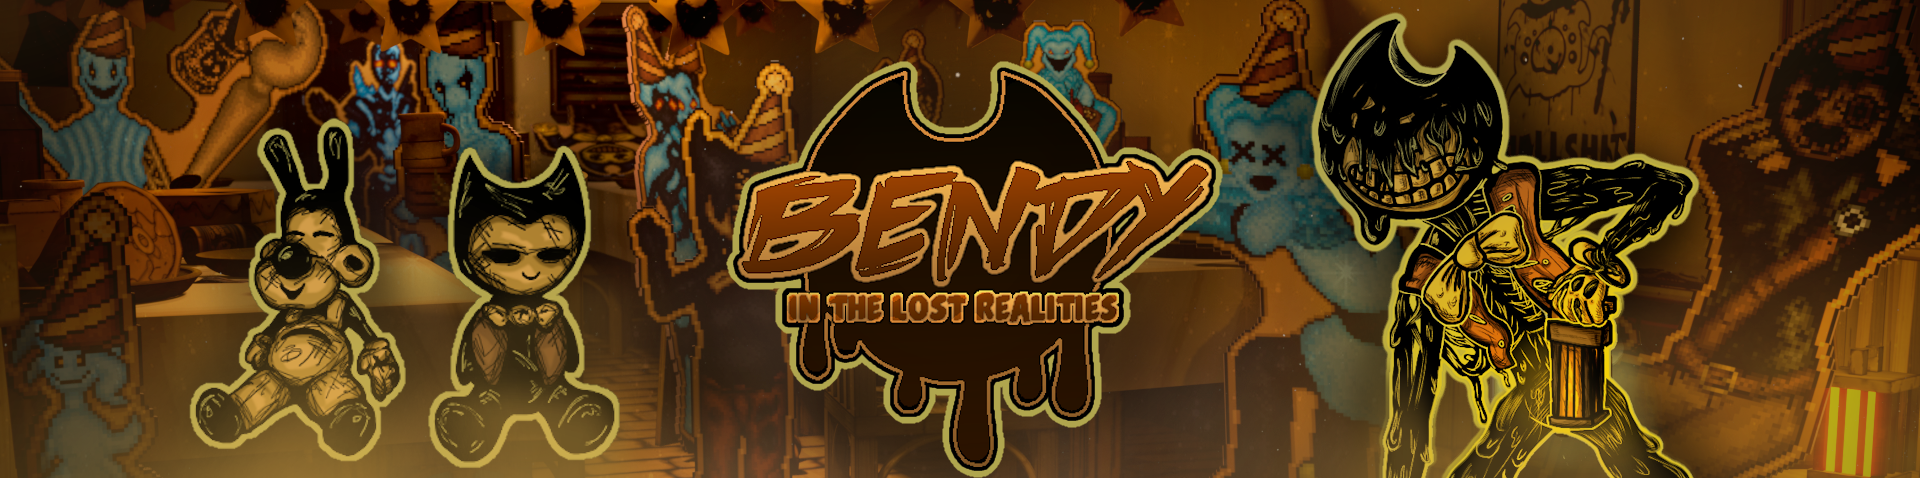 Bendy in the Lost Realities